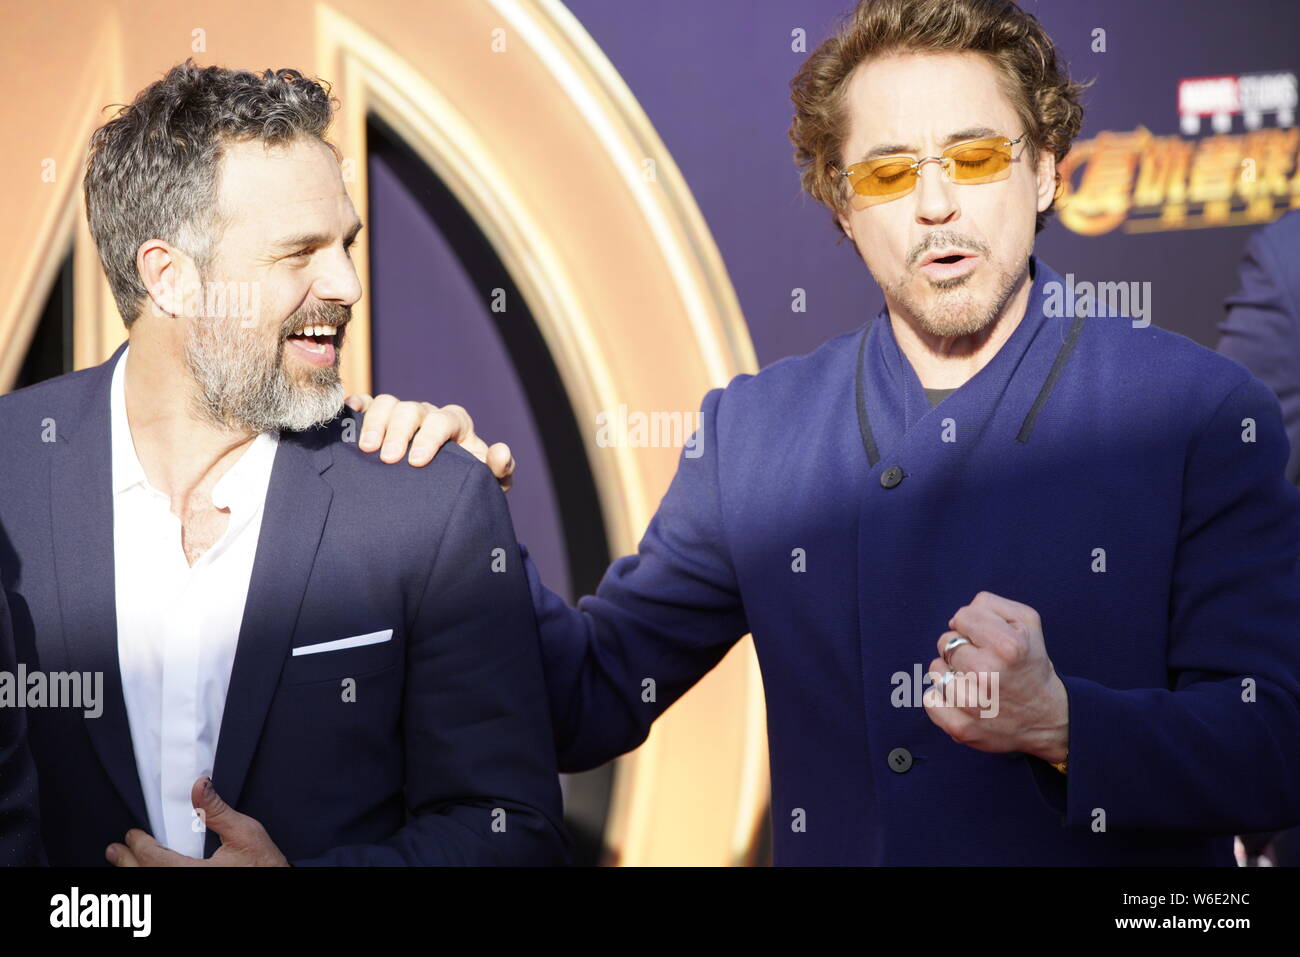 (From left) American actor and singer Robert Downey Jr. and English actor Tom Hiddleston pose as they arrive on the red carpet of a promotional event Stock Photo